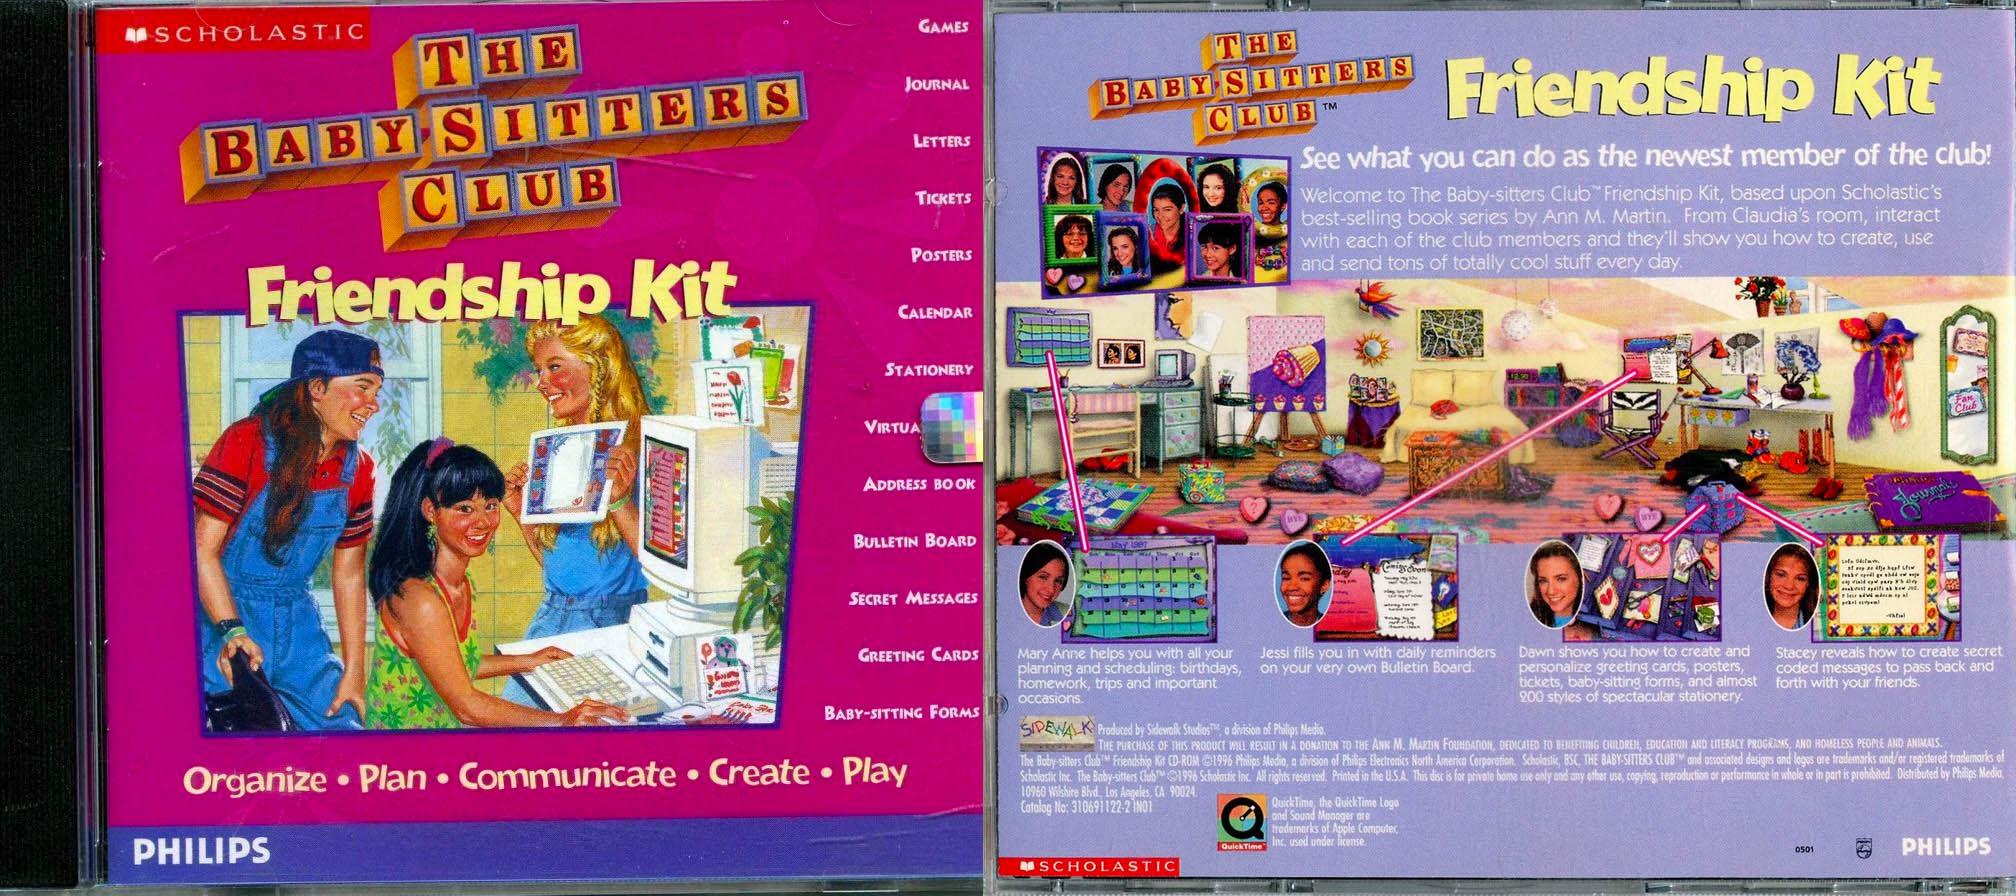 Front and back CD cover of the Baby-Sitters Club Friendship Kit